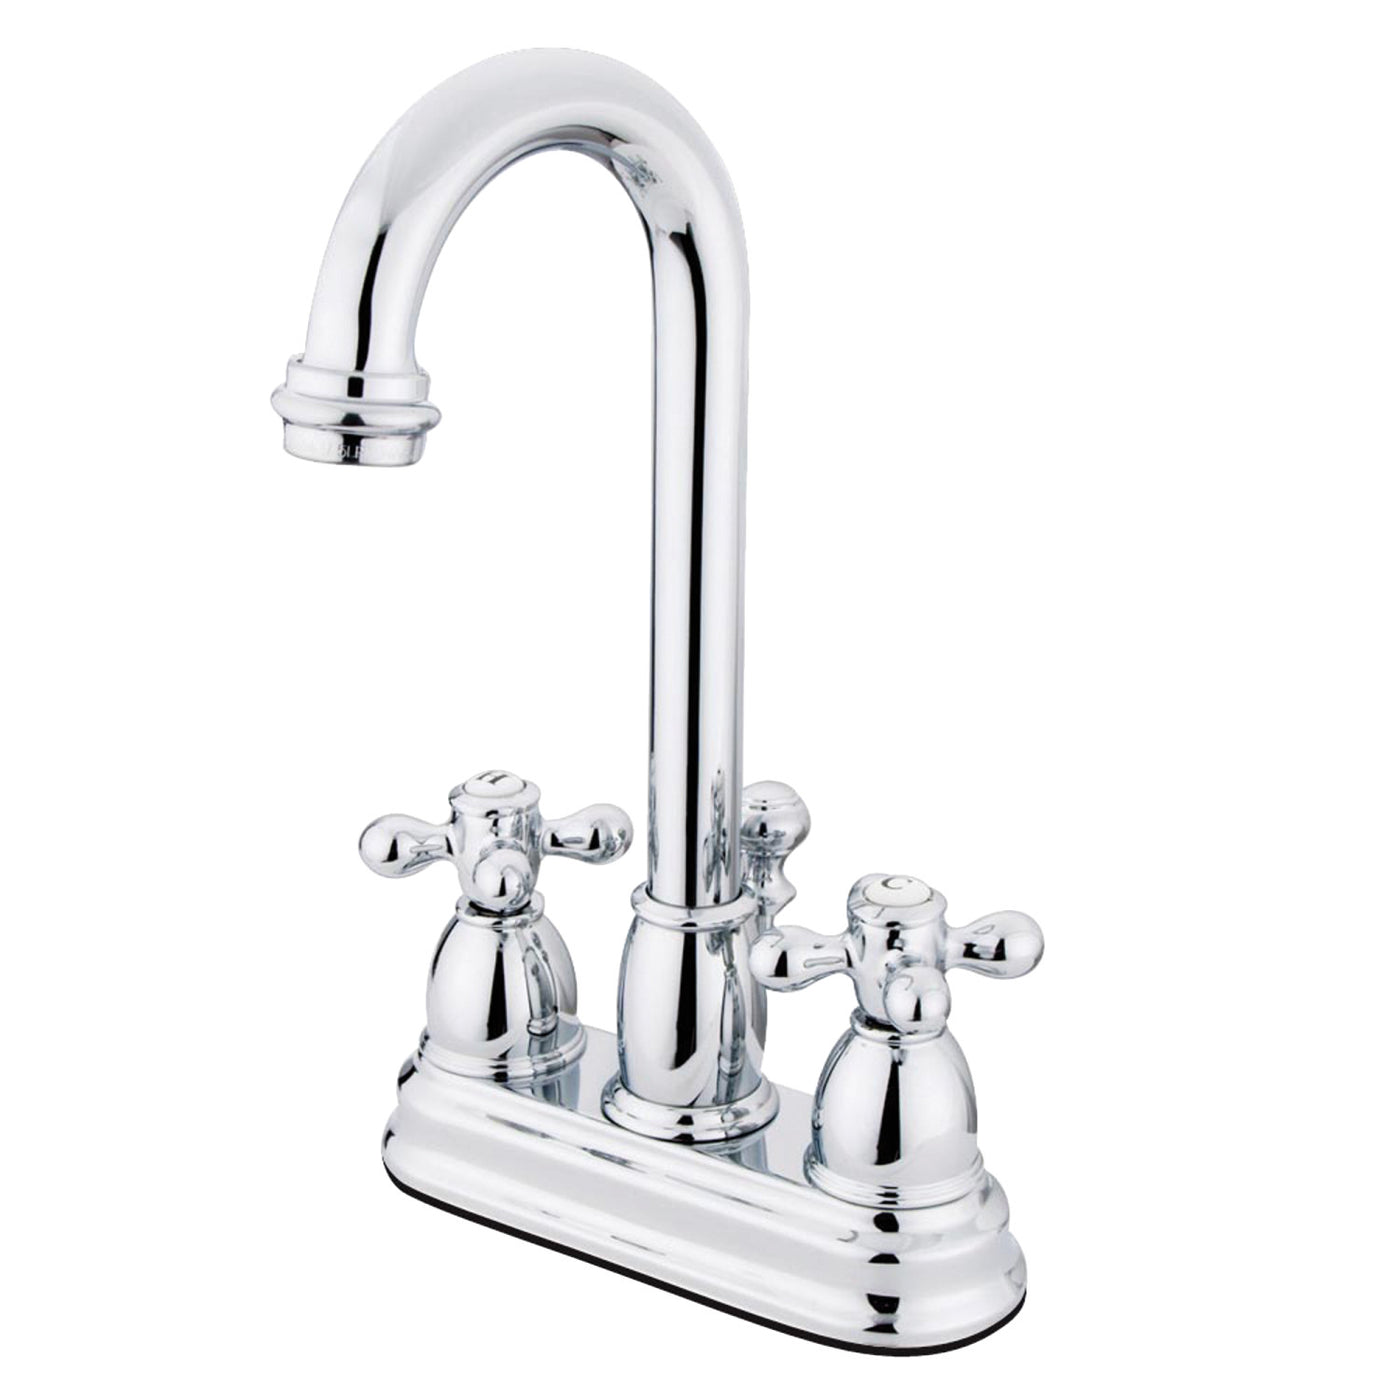 Elements of Design EB3611AX 4-Inch Centerset Bathroom Faucet, Polished Chrome